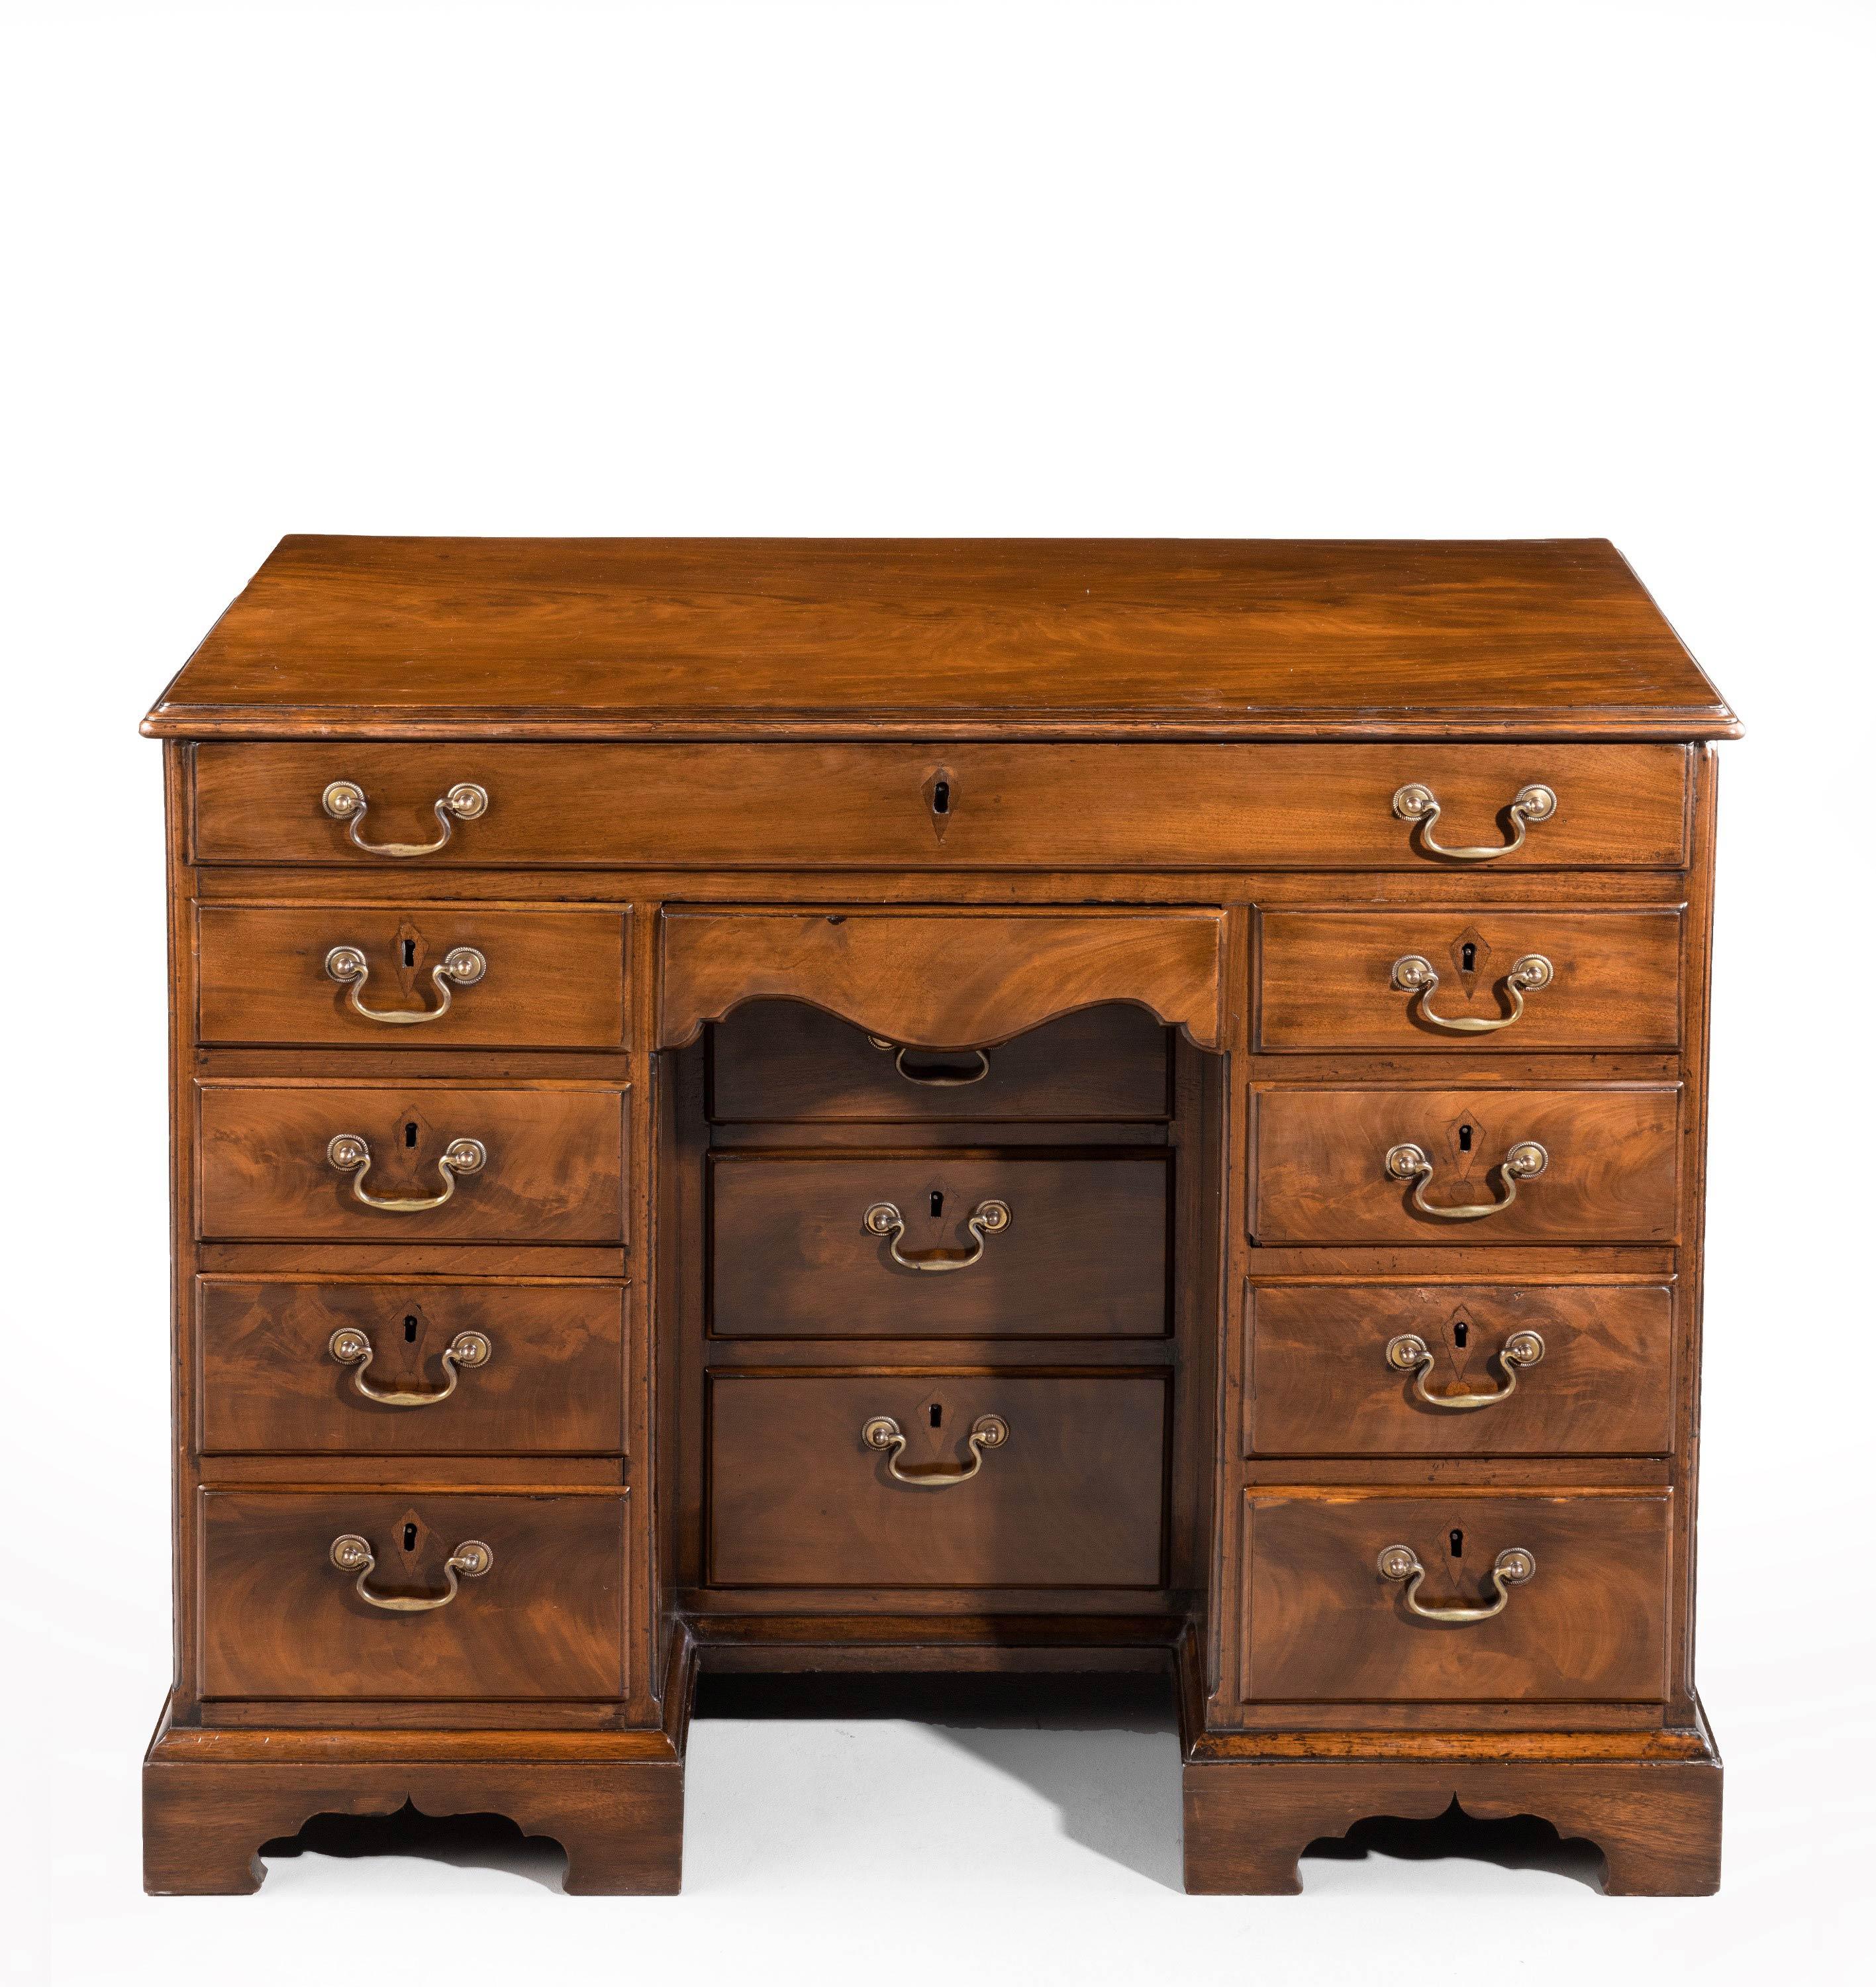 Chippendale Period Kneehole Desk or Dressing Table 1